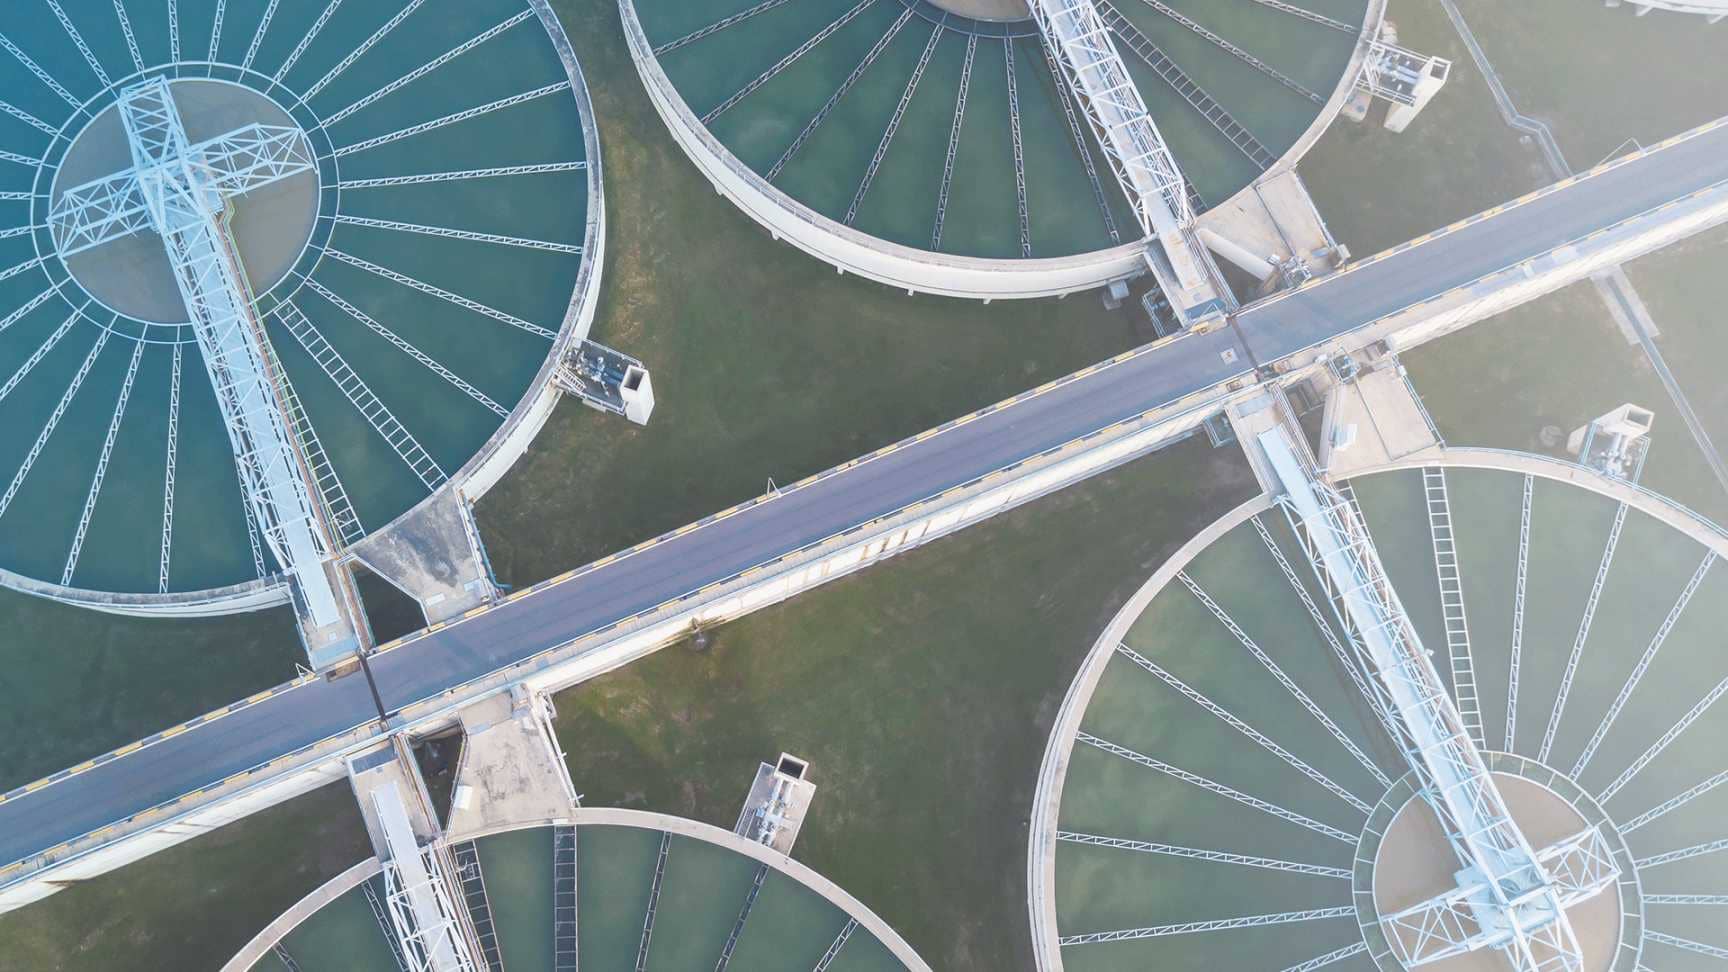 Sky view of wastewater treatments